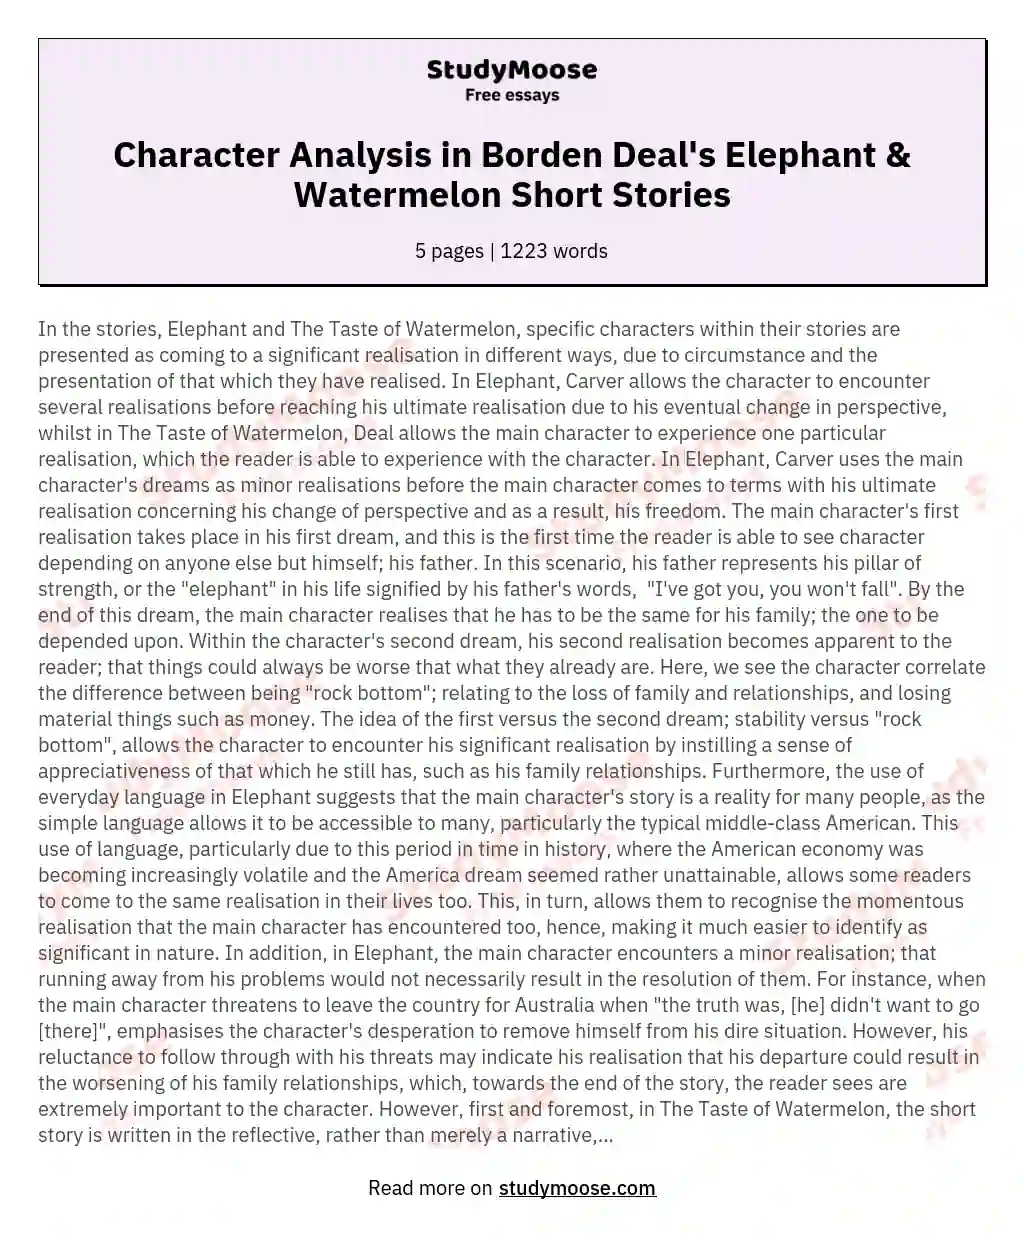 Character Analysis in Borden Deal's Elephant & Watermelon Short Stories essay